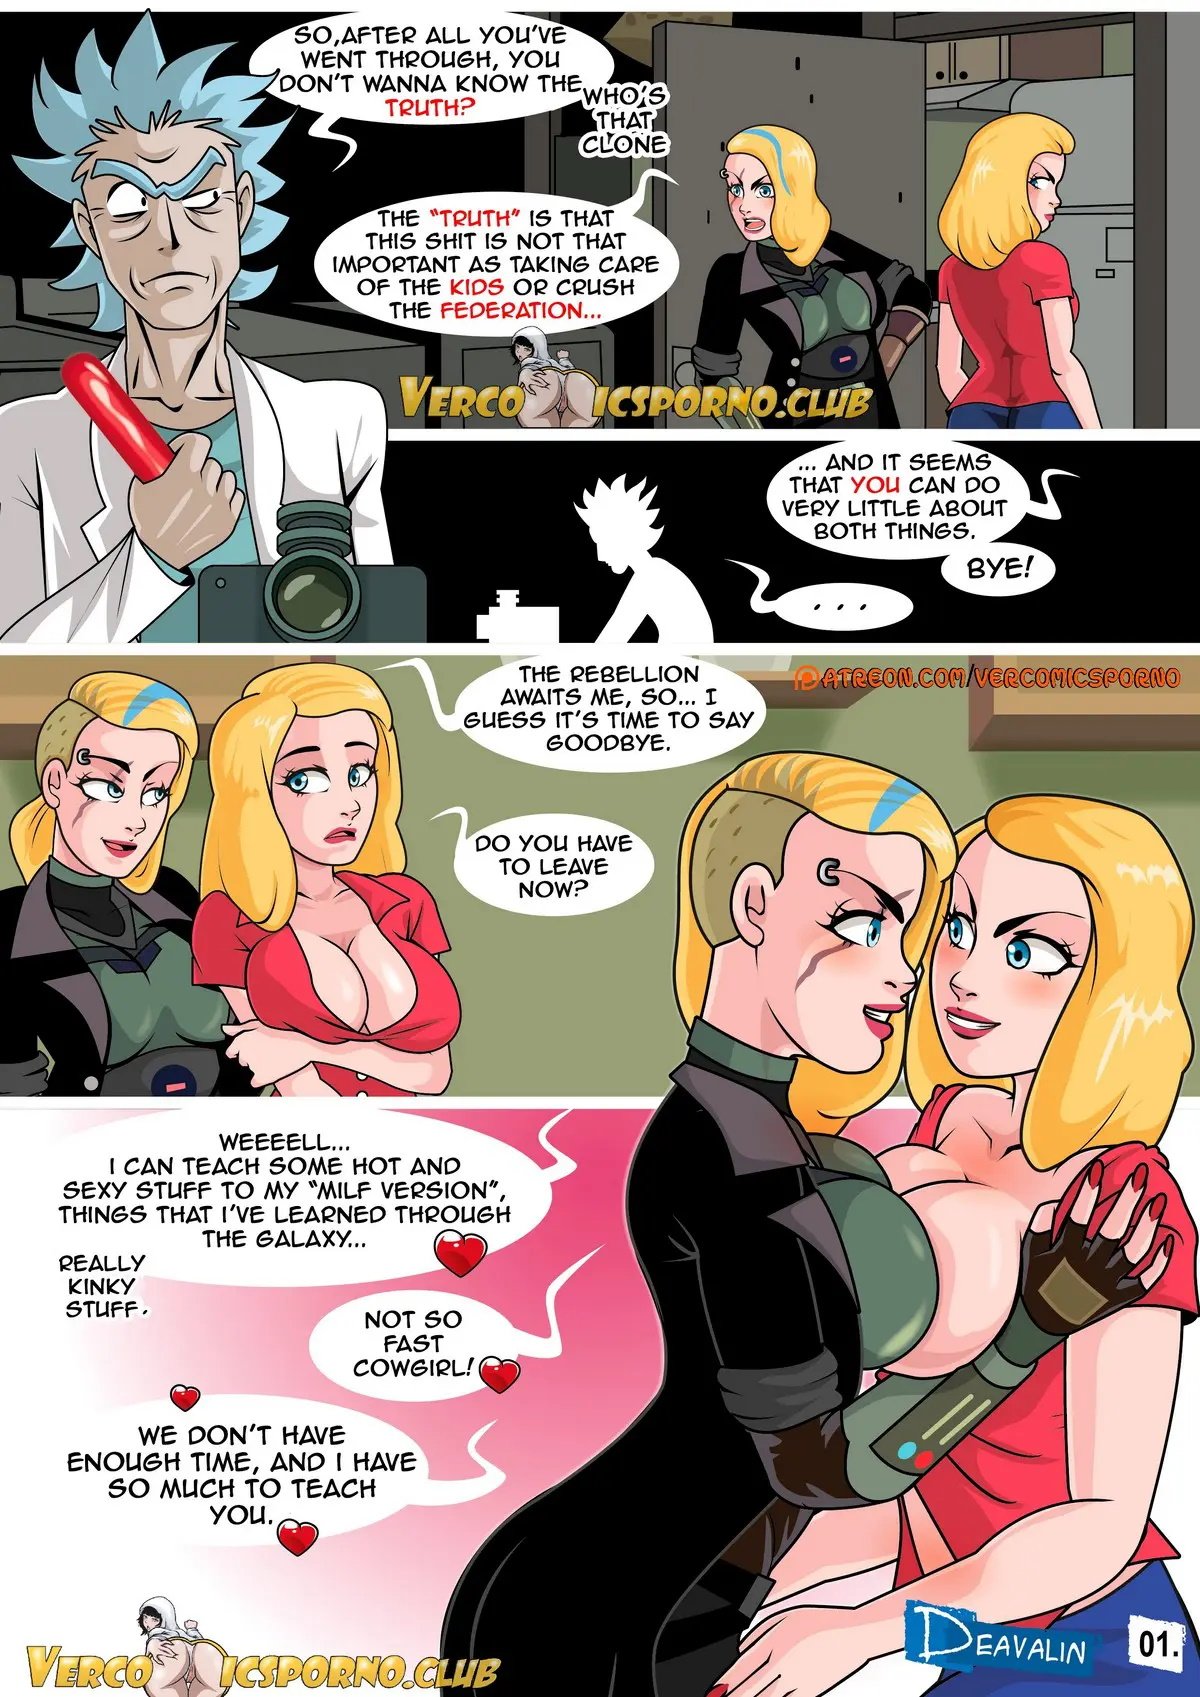 Beth And Beth (Rick and Morty) [Deavalin] - 1 . Beth And Beth - Chapter 1 ( Rick and Morty) [Deavalin] - AllPornComic